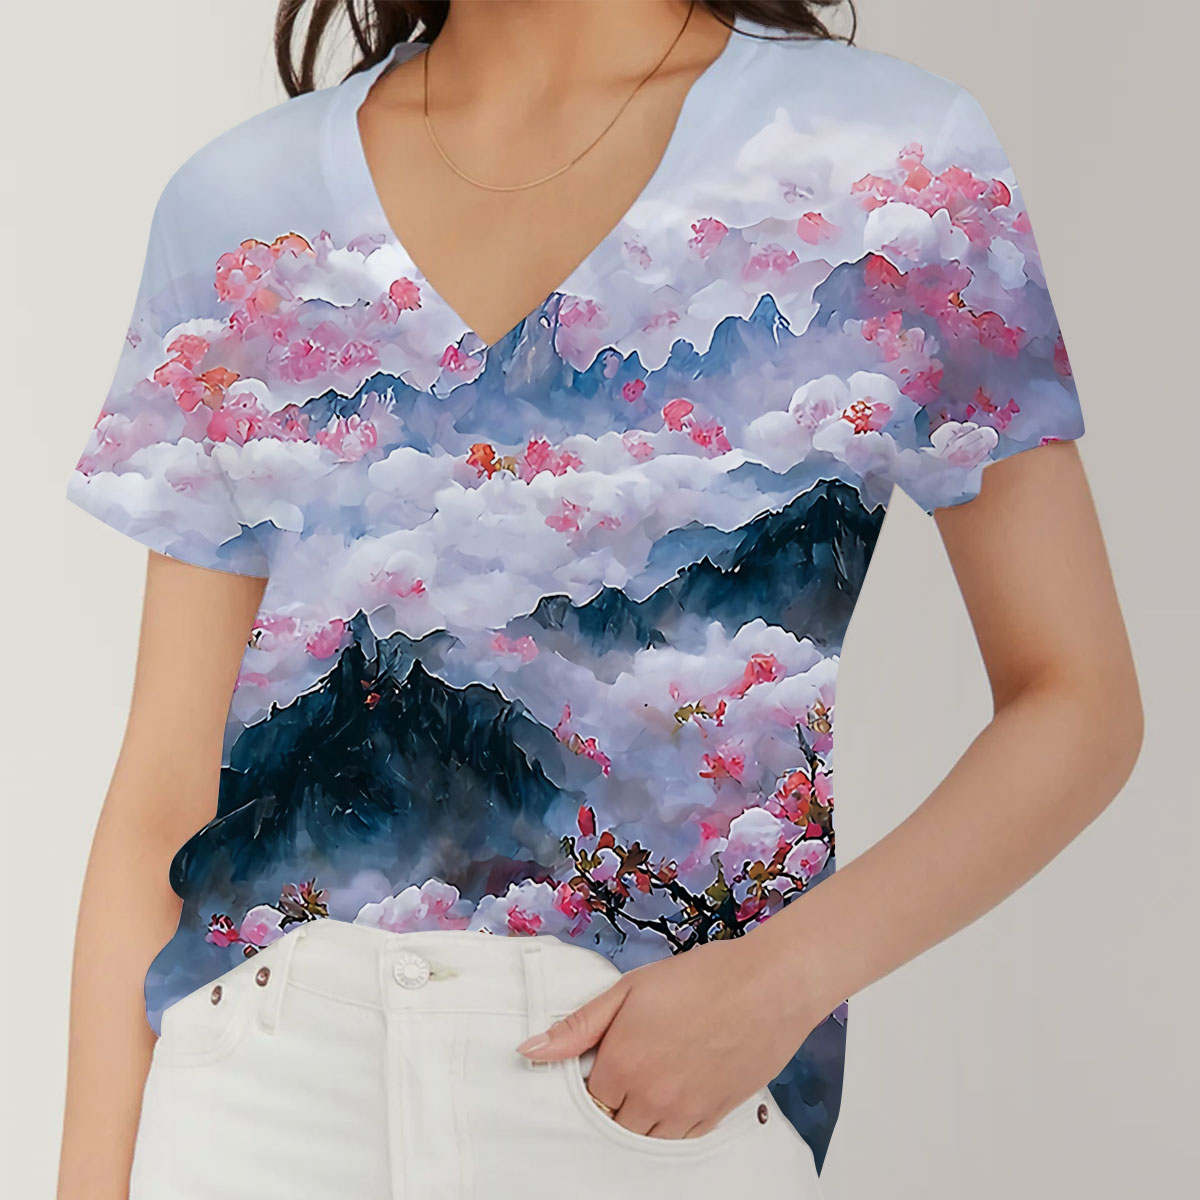 Watercolor Abstract Blossom V-Neck Women's T-Shirt_1_2.1